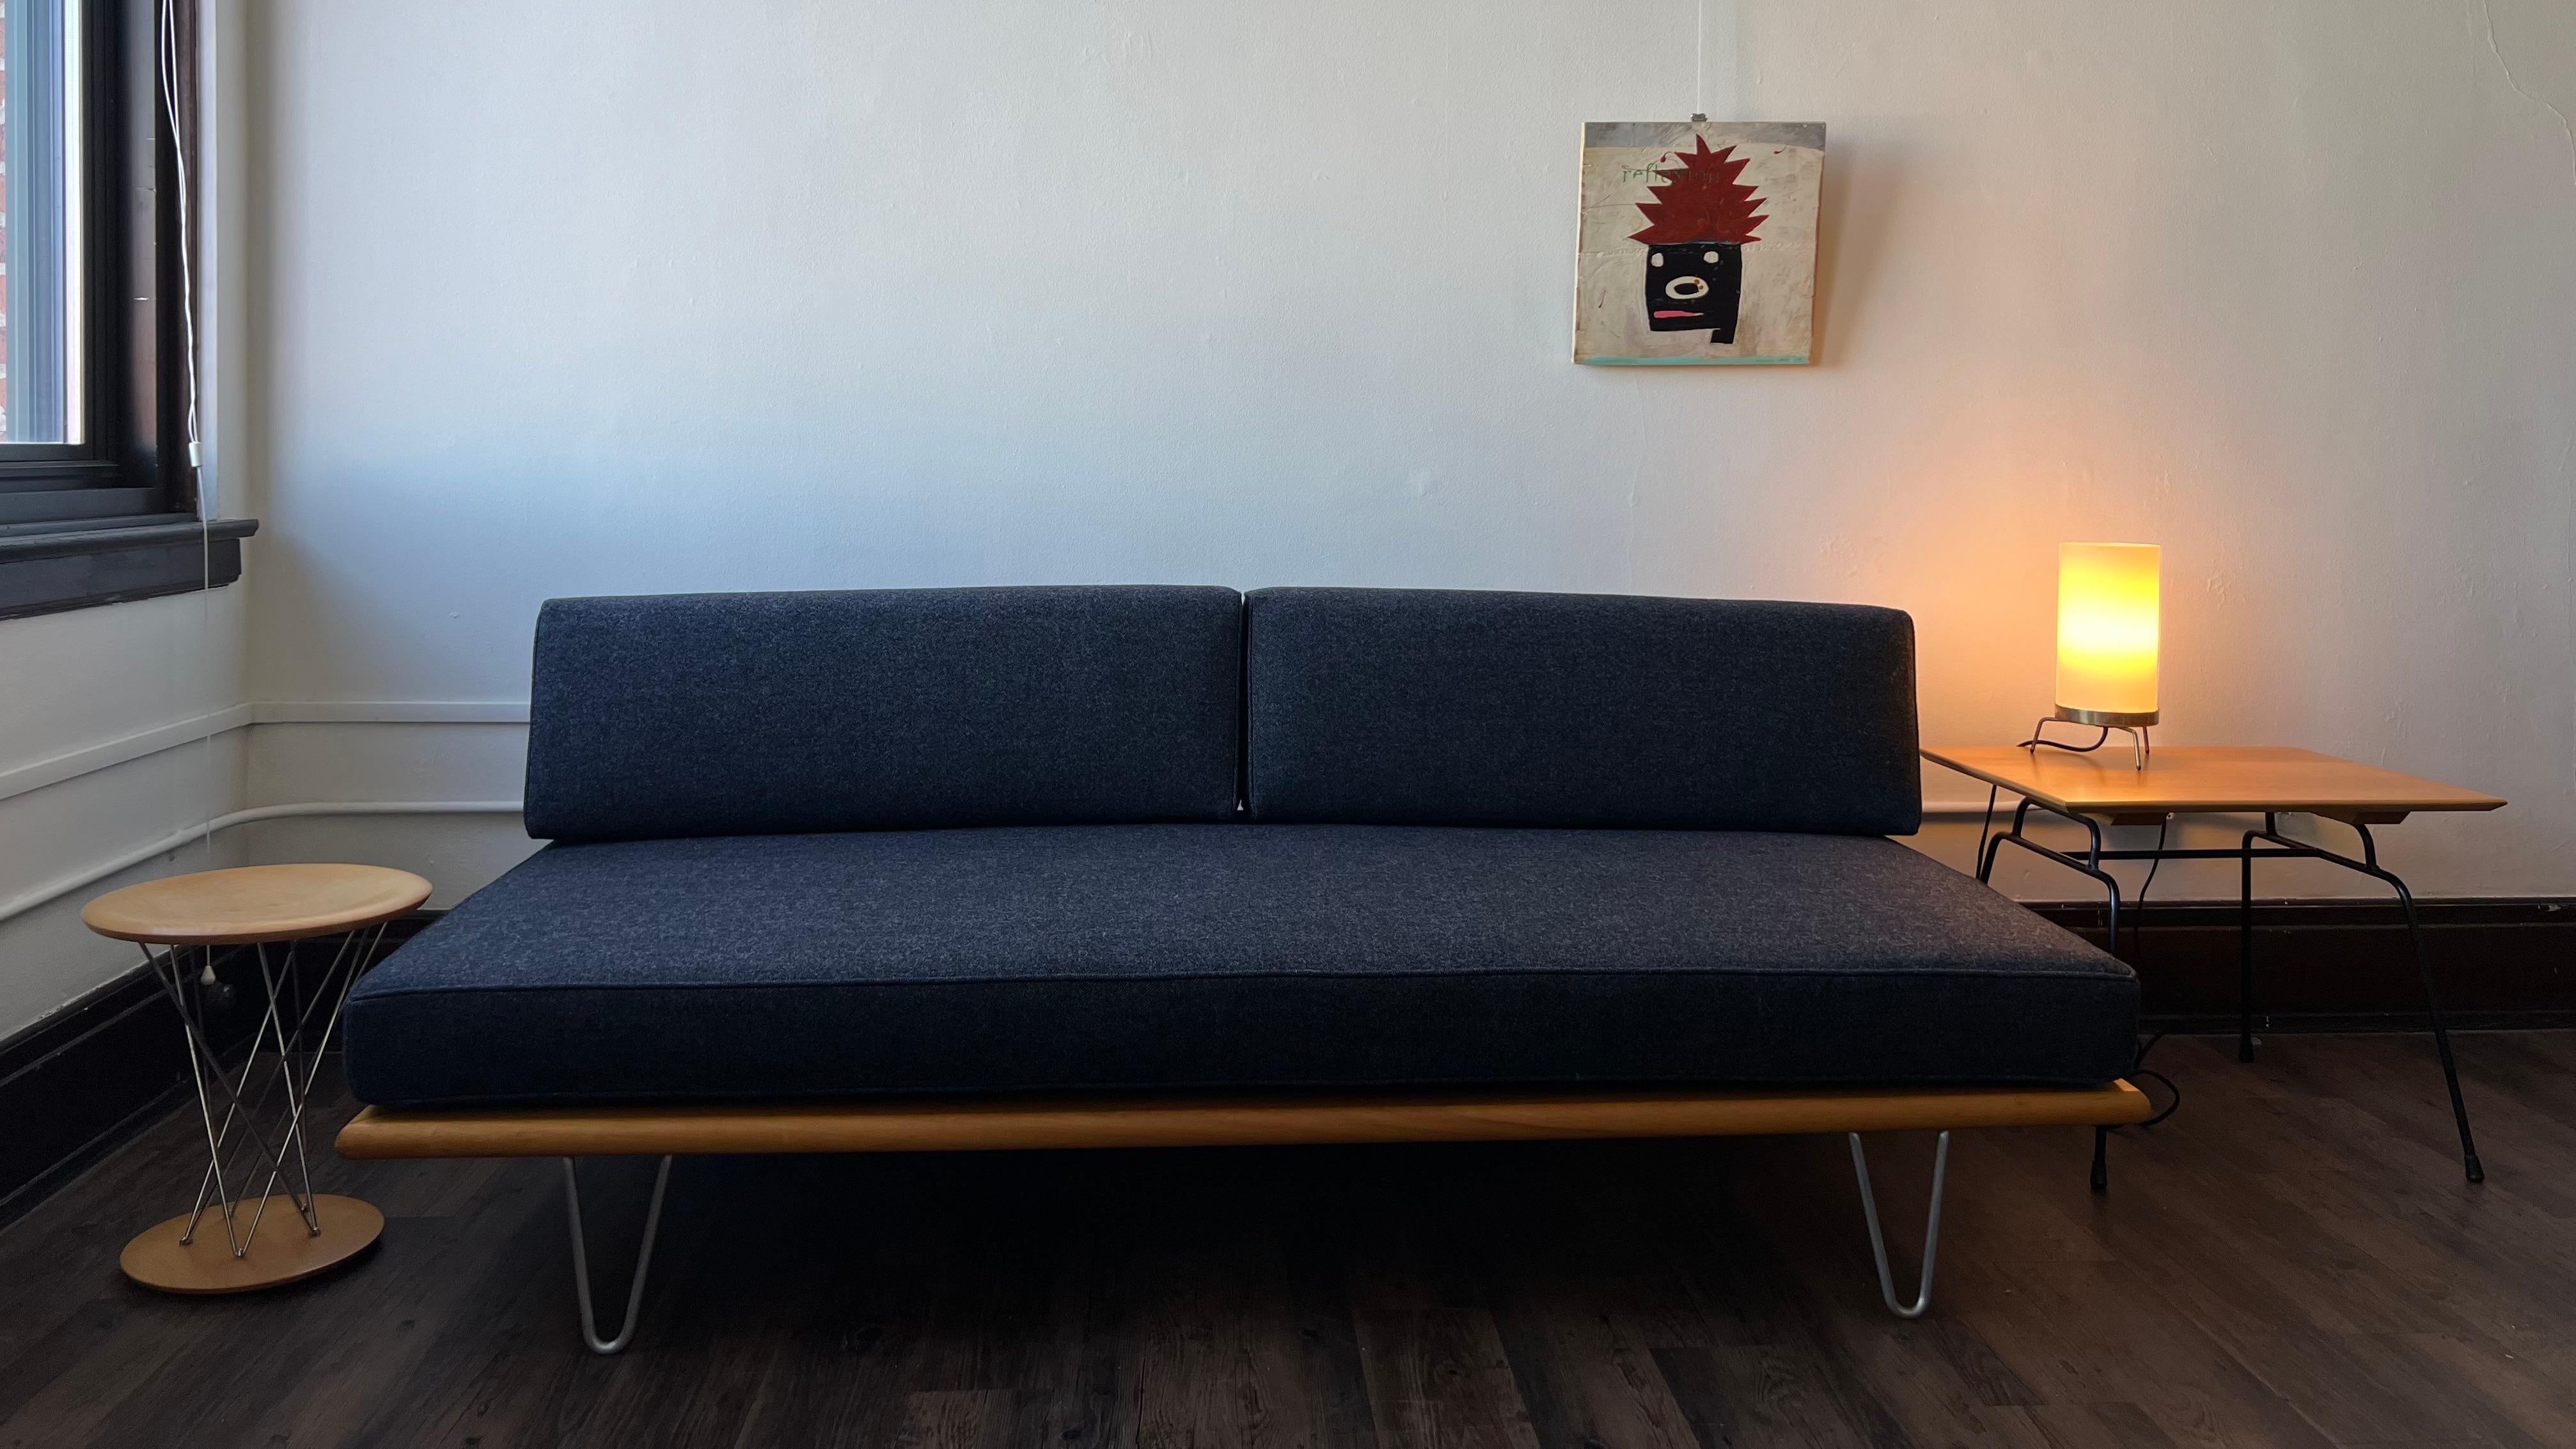 Vintage George Nelson daybed in Maharam Beck (Overshadow) and ash with hairpin legs. Completely restored from the top down - new cushions, refinished frame and cleaned legs and metal components. While restored, the wood still maintains its golden